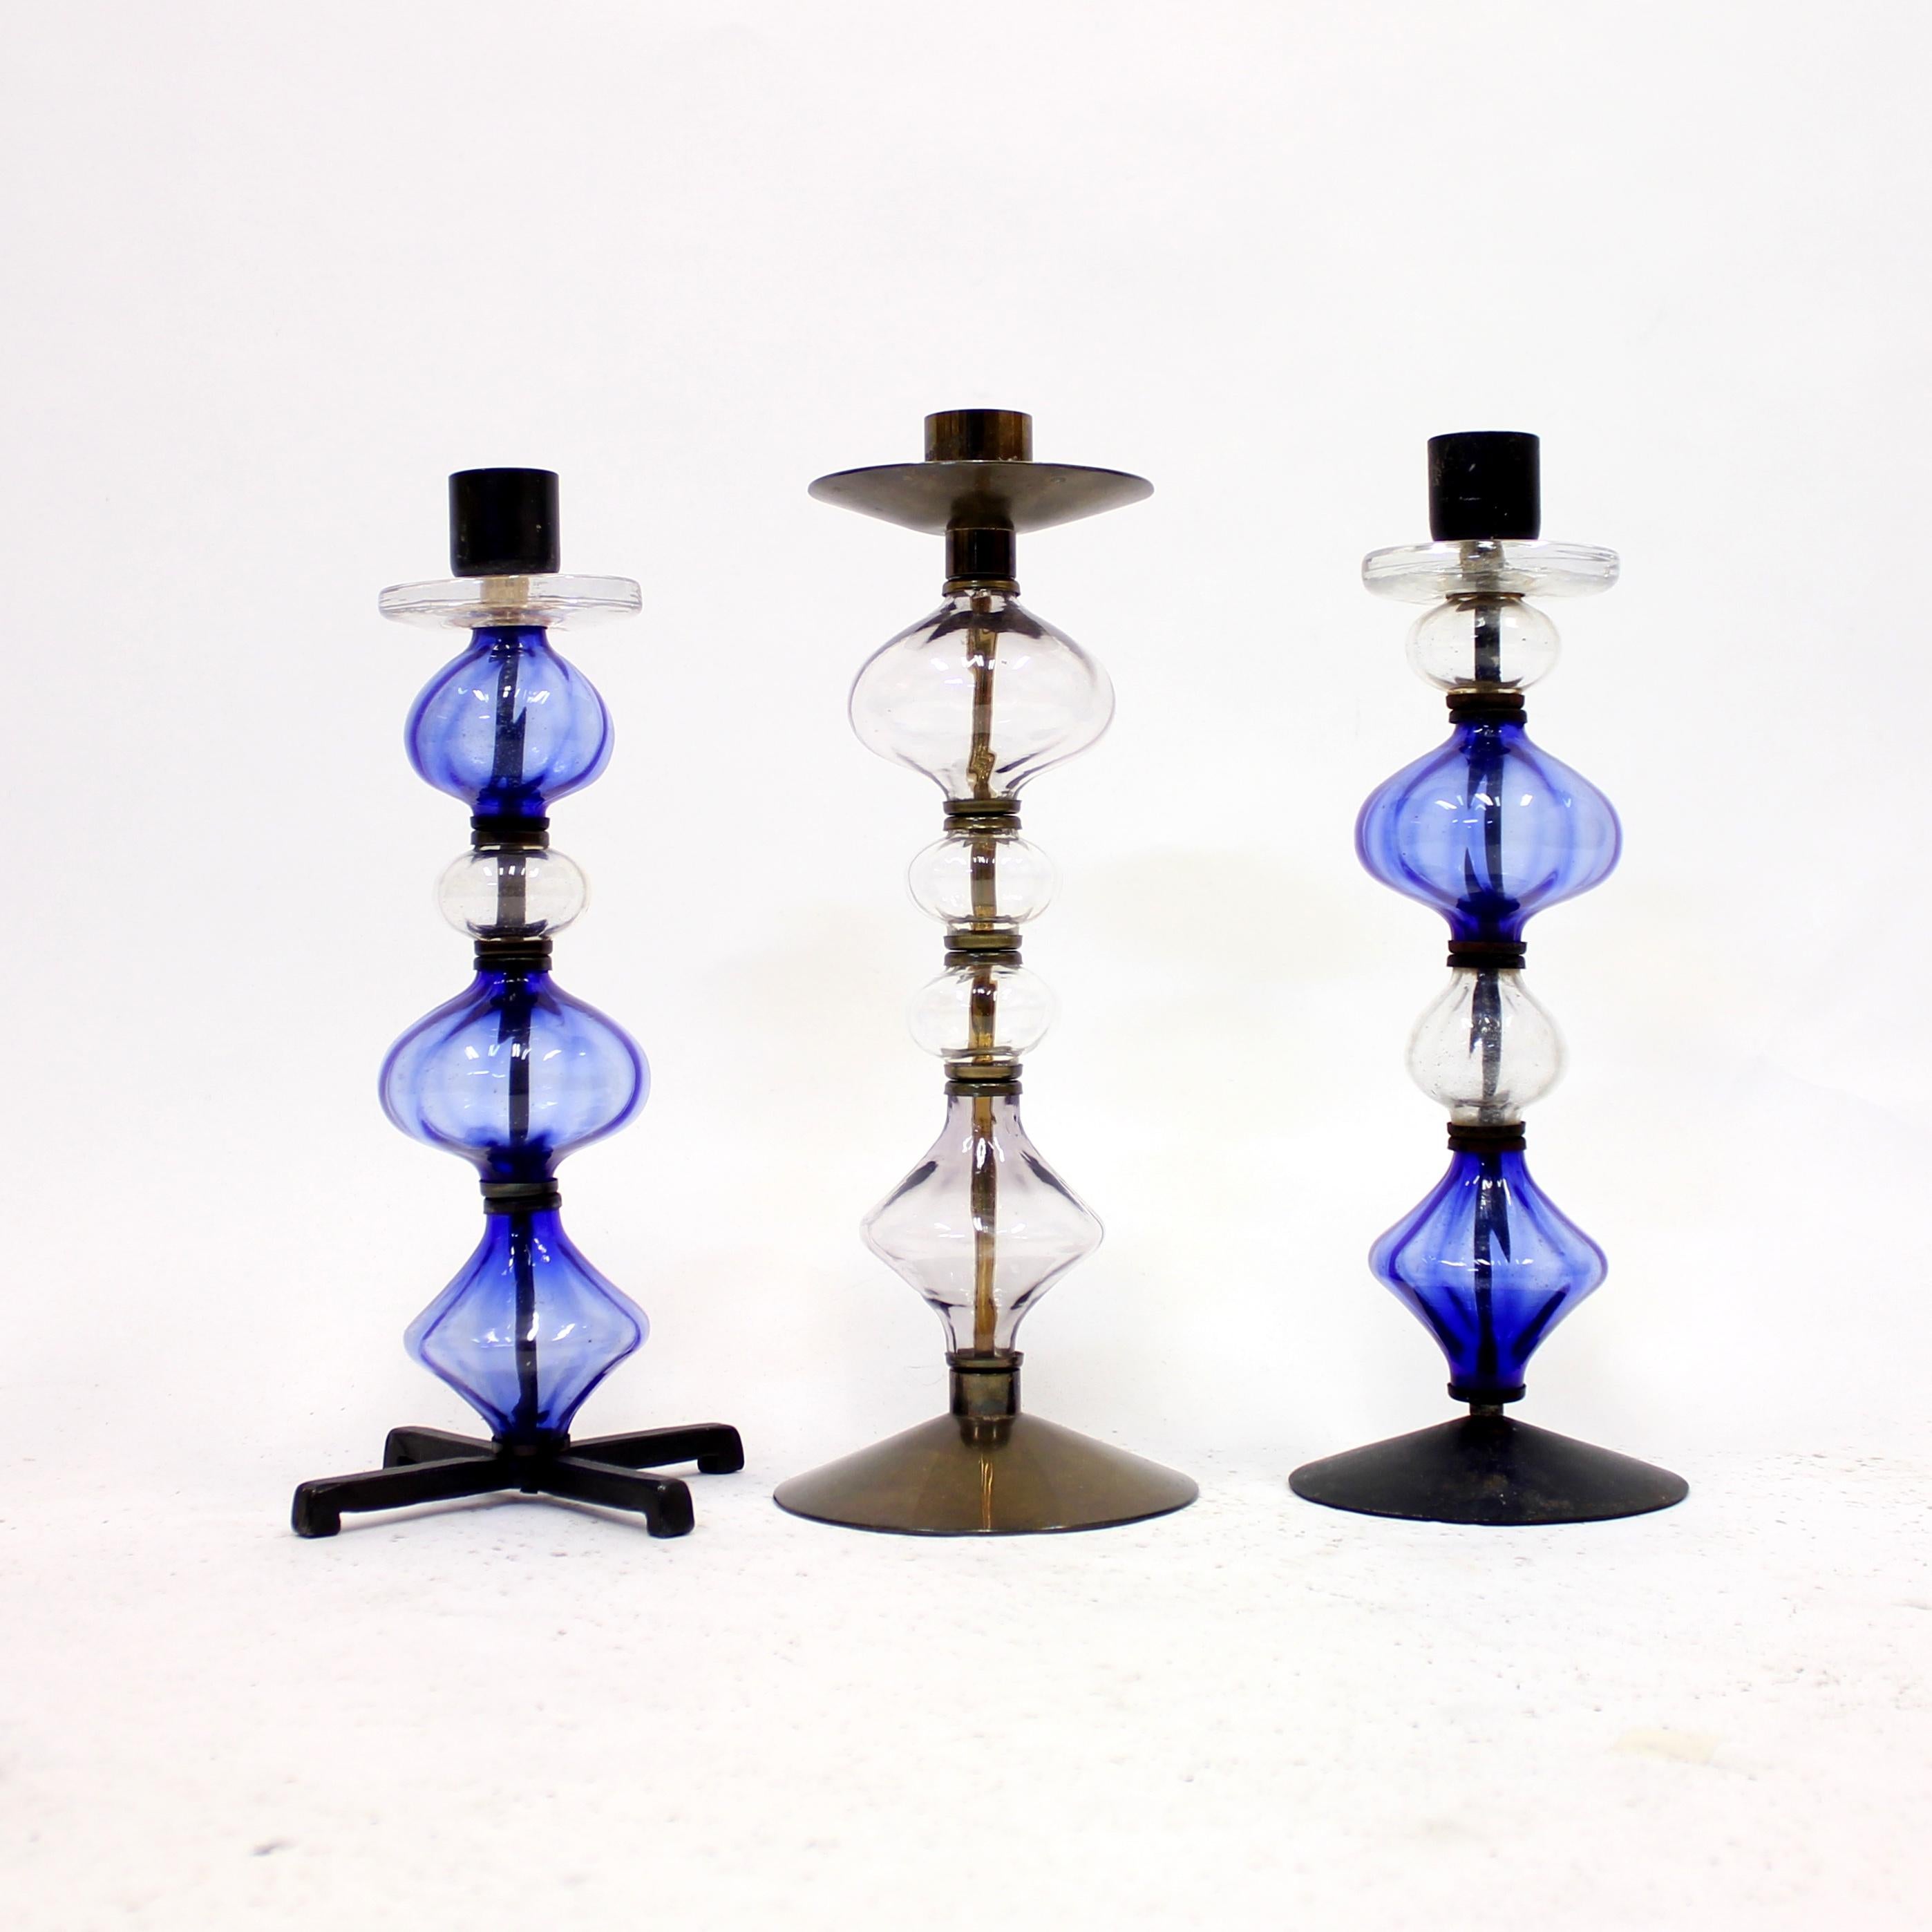 Set of three large candle holders by Erik Höglund in glass and wrought iron and brass. Made by Swedish manufacturer Boda Glasbruk & Smide in the 1960s. Base and frame made of wrought iron with blue and clear glass decoration. Diameter of the bases